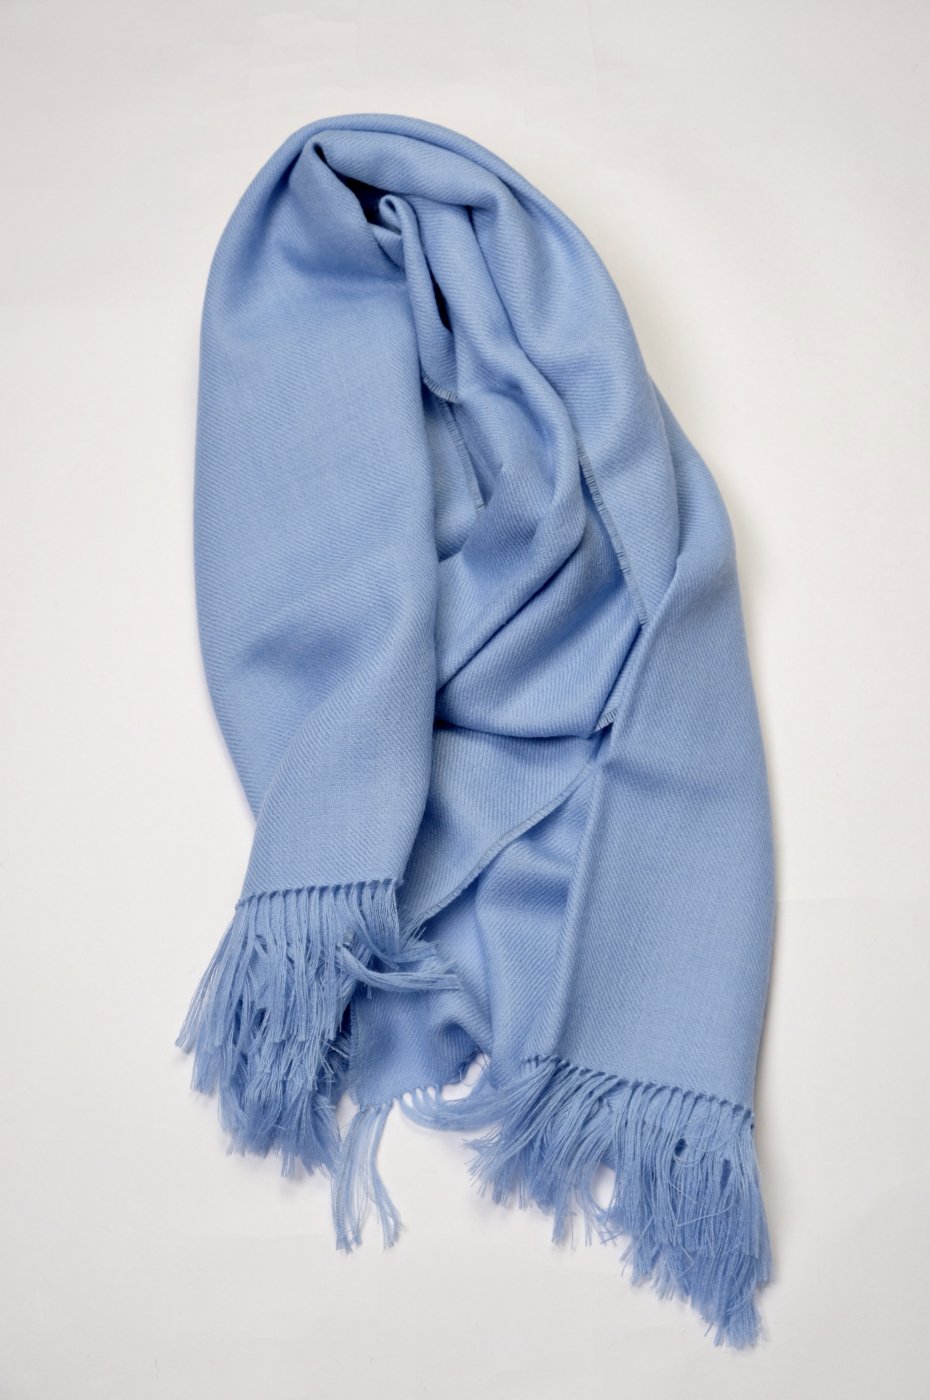 THE INOUE BROTHERS...ザ イノウエブラザーズ-NON BRUSHED LARGE STOLE-BABY BLUE-